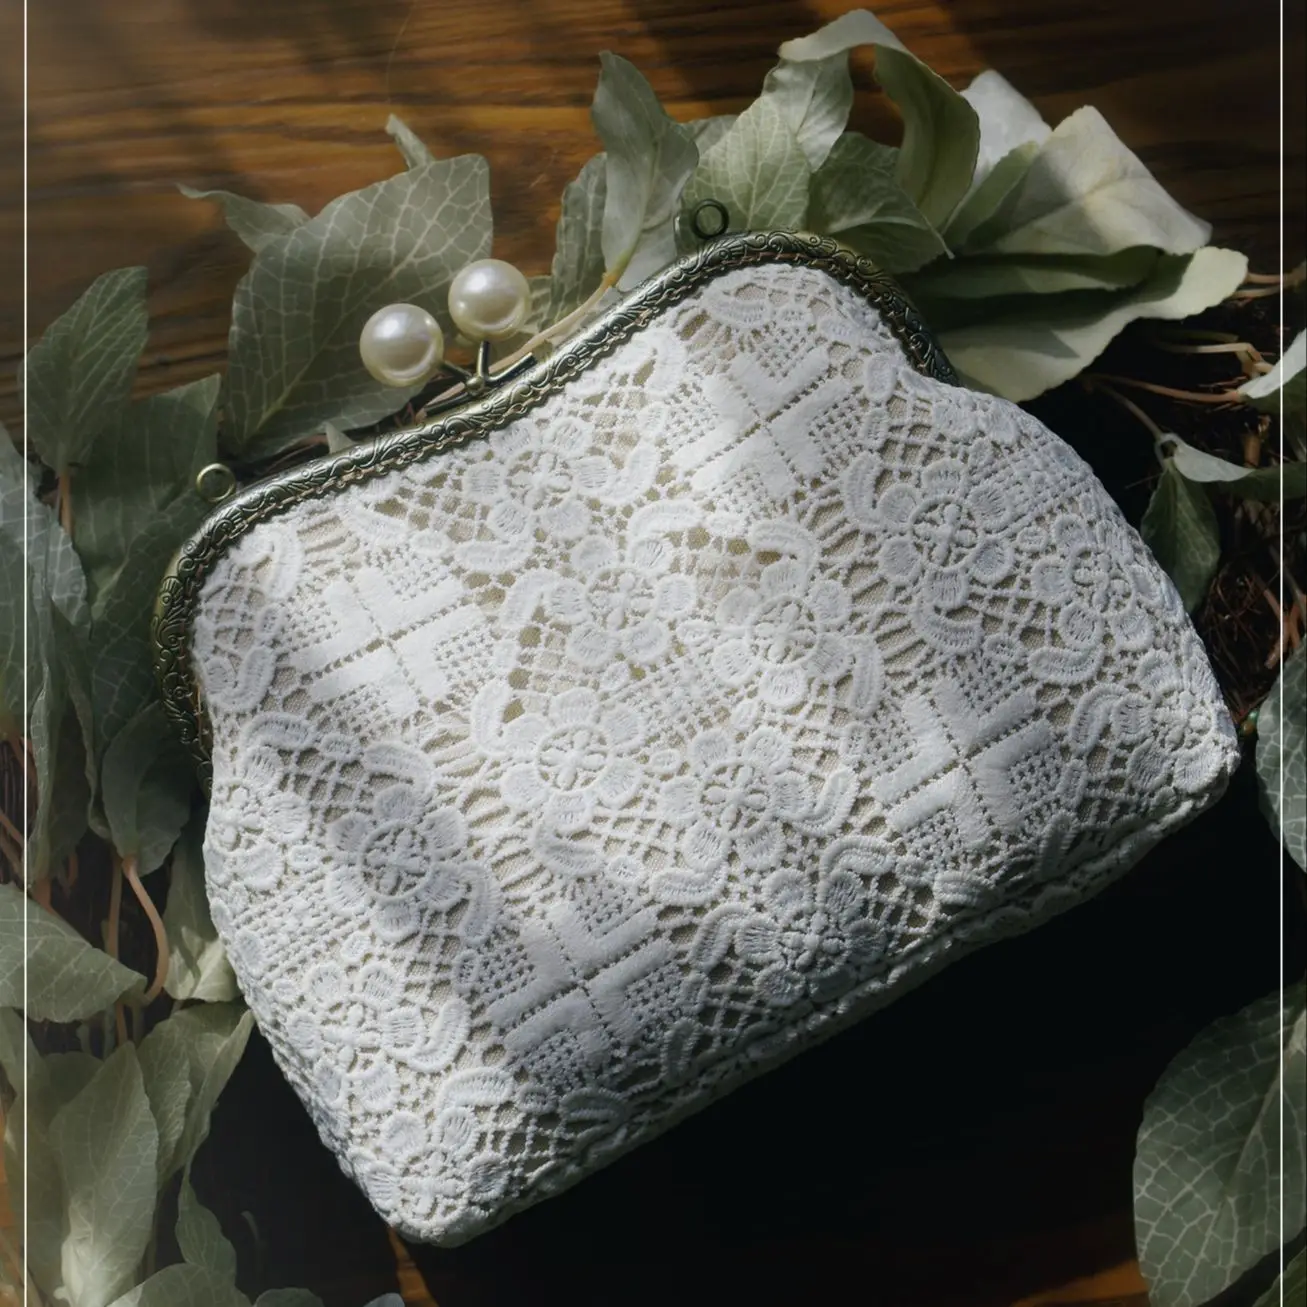 

Lost in Vintage Floral Needle White Lace Purse Panels with a Gold Plated Frame Chains Kiss Lock Bead Pearl Closure Bridal Clutch